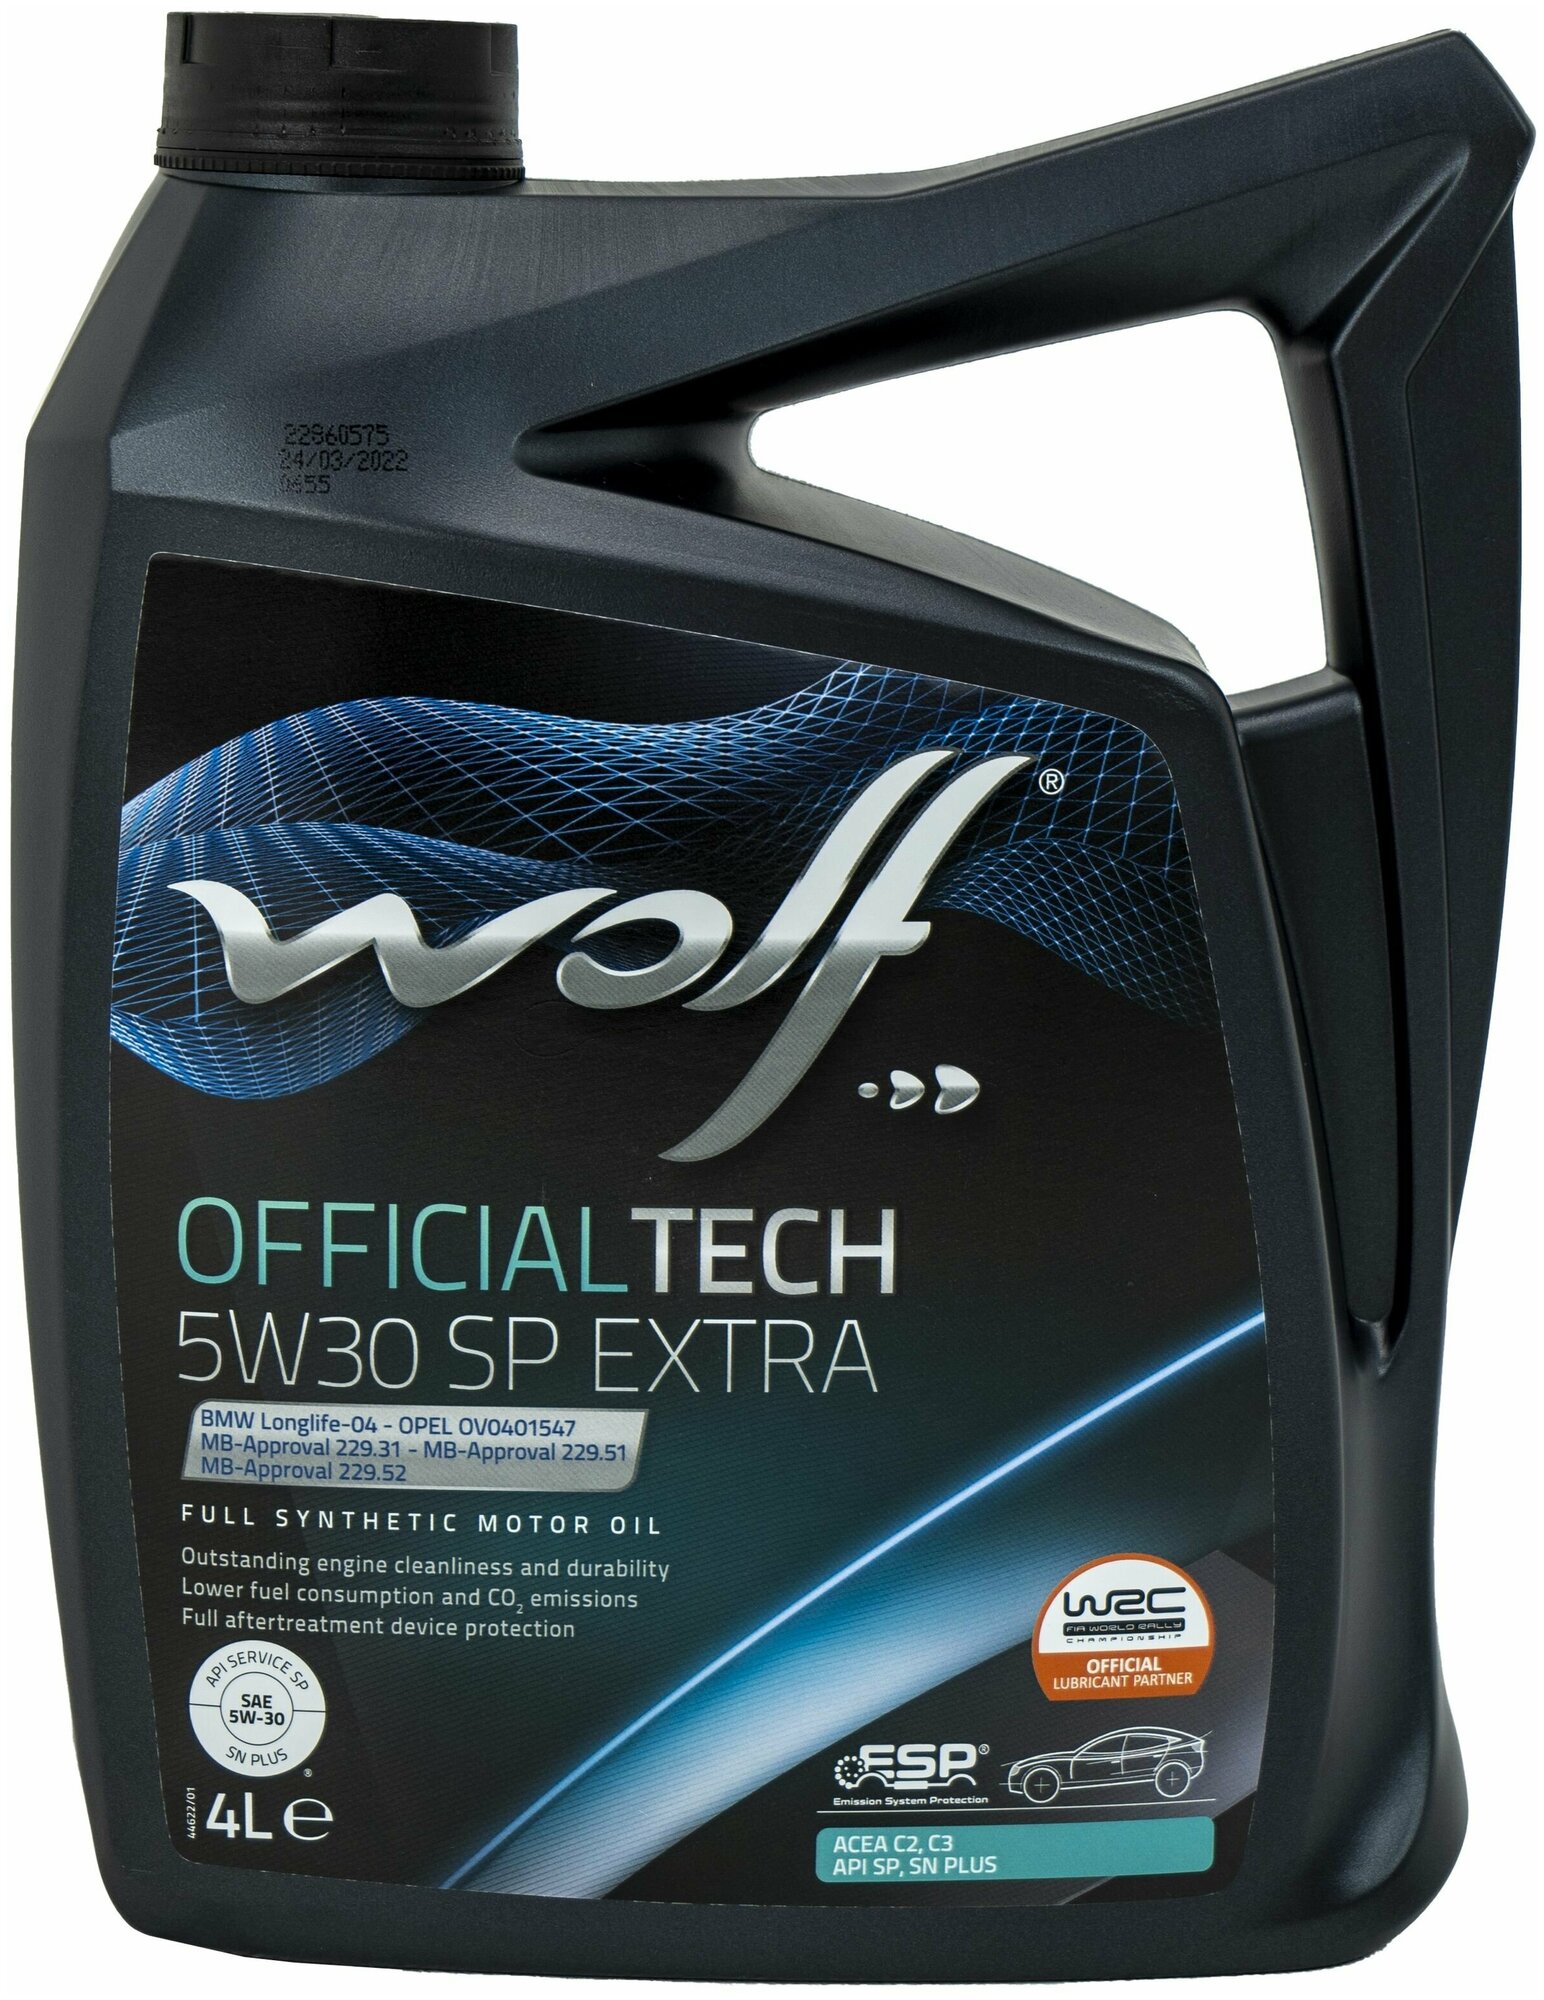 WOLF OFFICIALTECH 5W-30 SP EXTRA масло моторное (4Л) 1049359